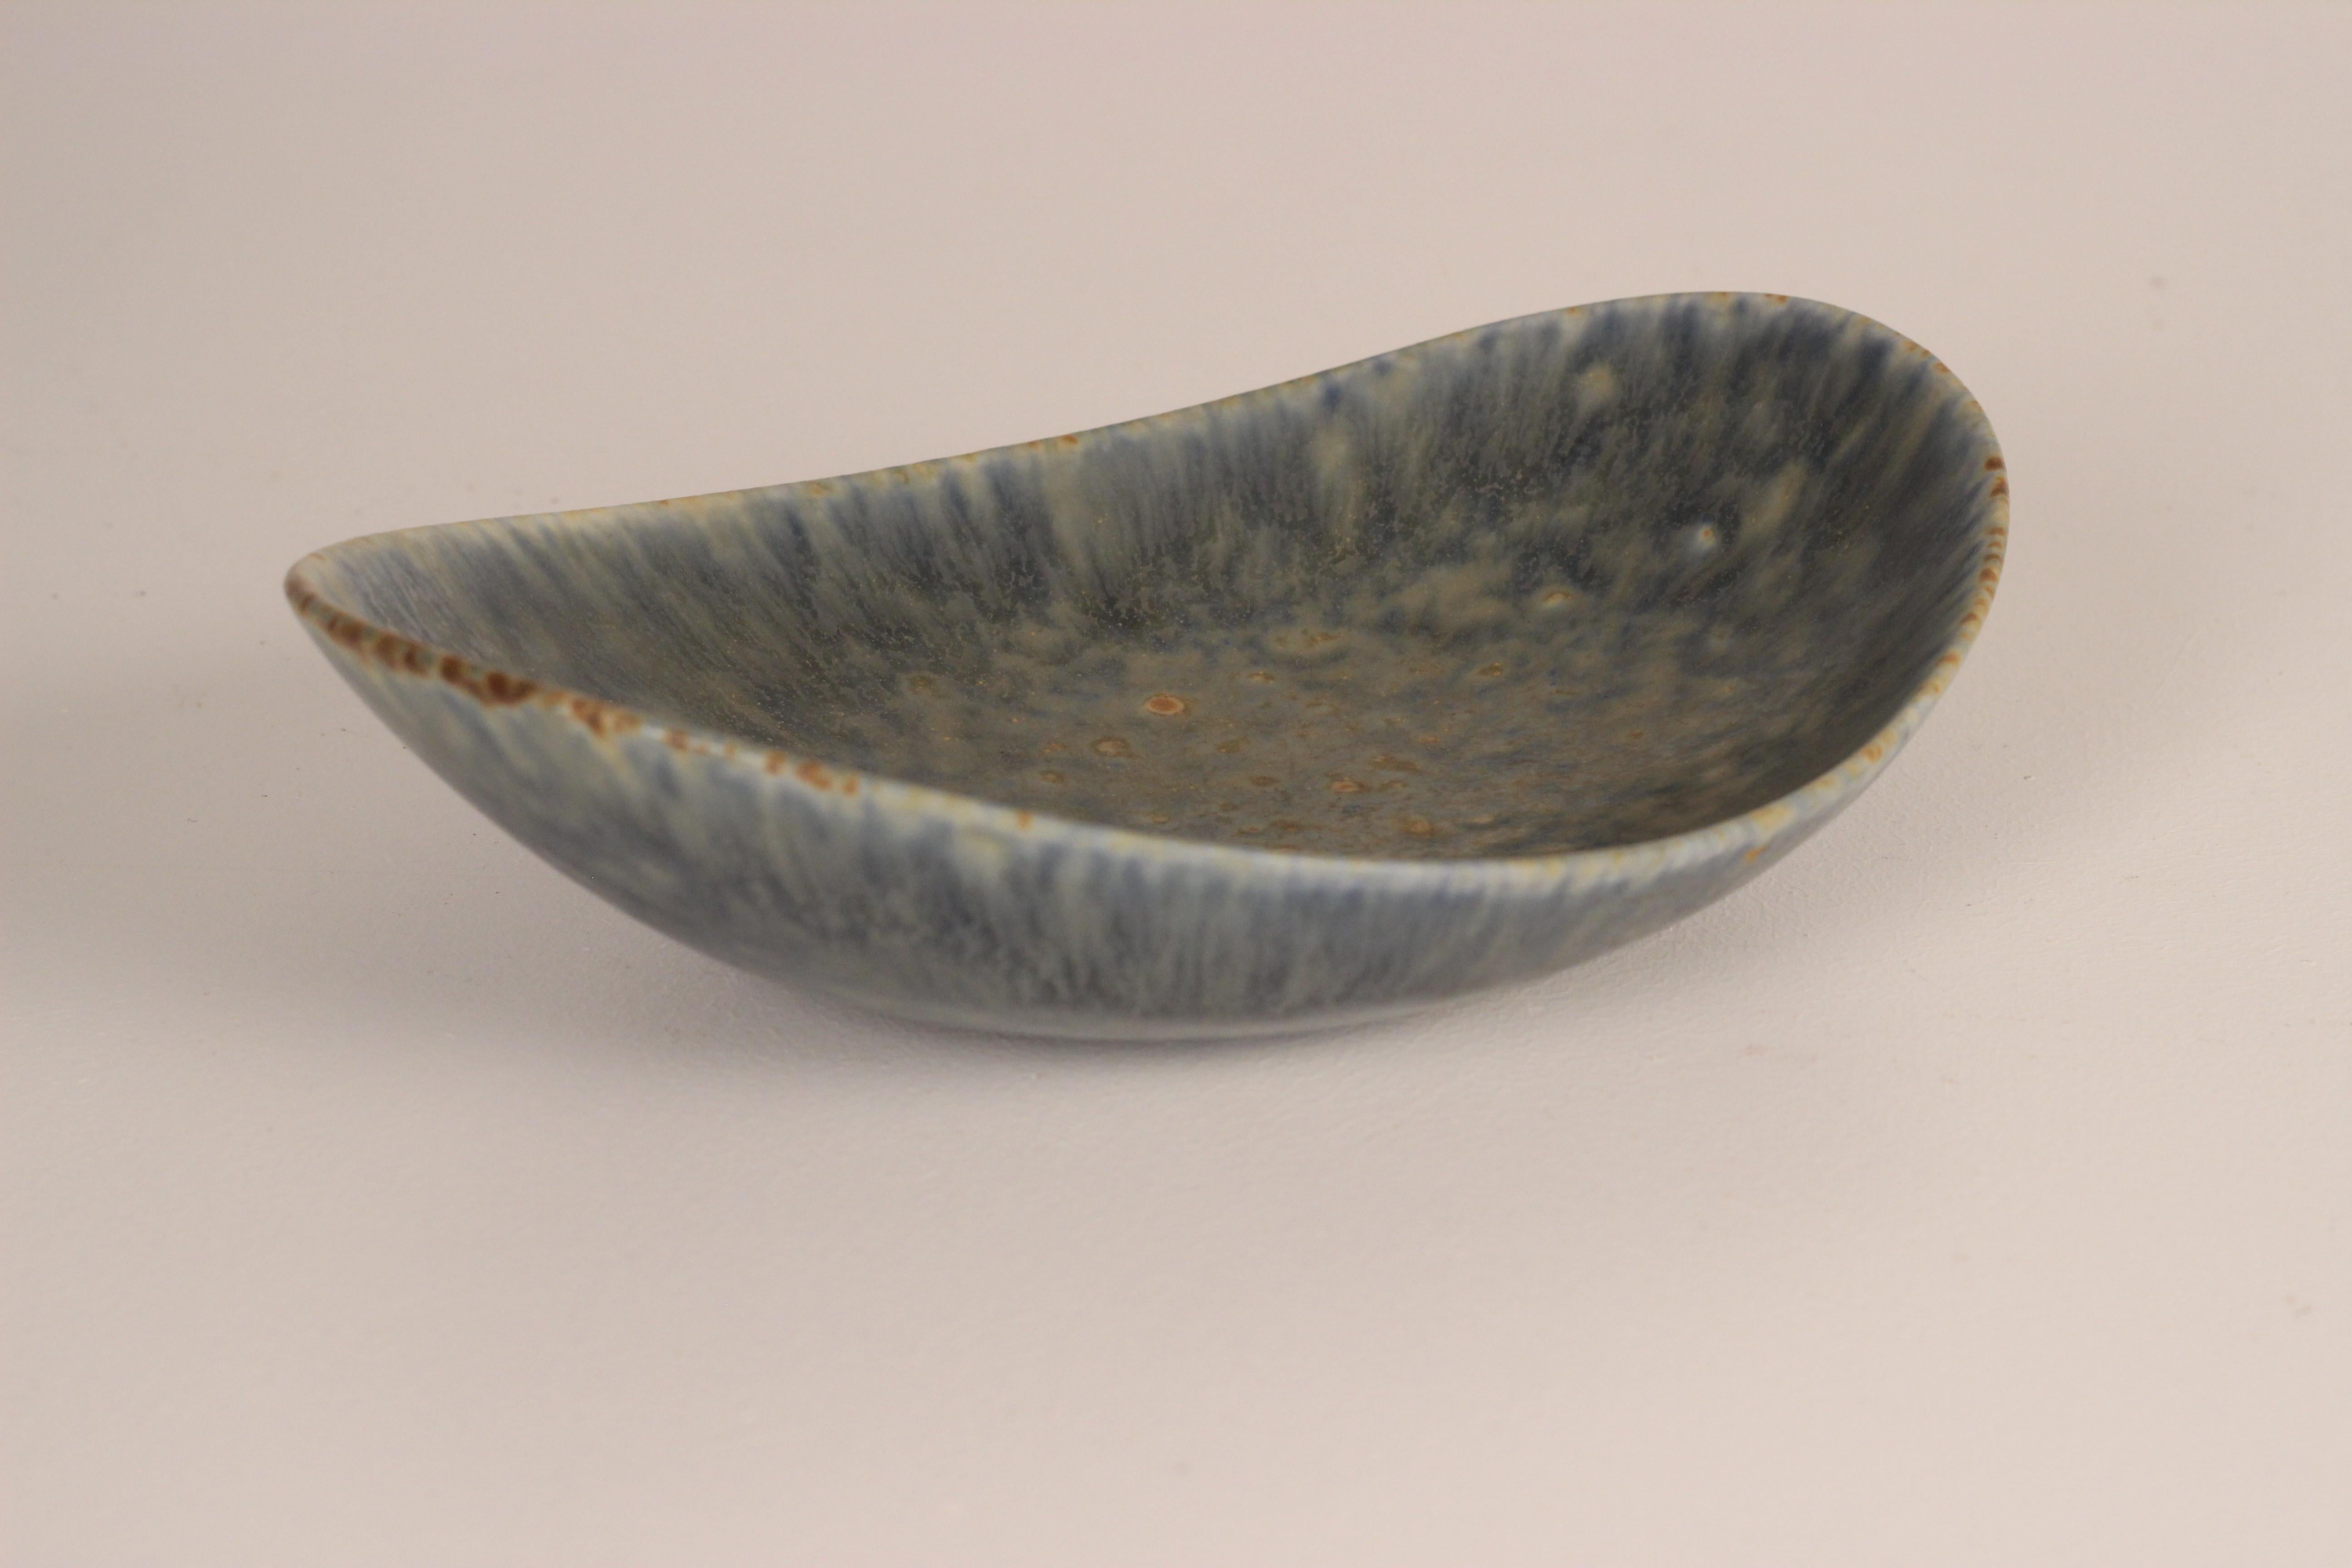 Ceramic Scandinavian Modern Swedish Bowl by Carl Harry Stalhane and Maker Rorstrand For Sale